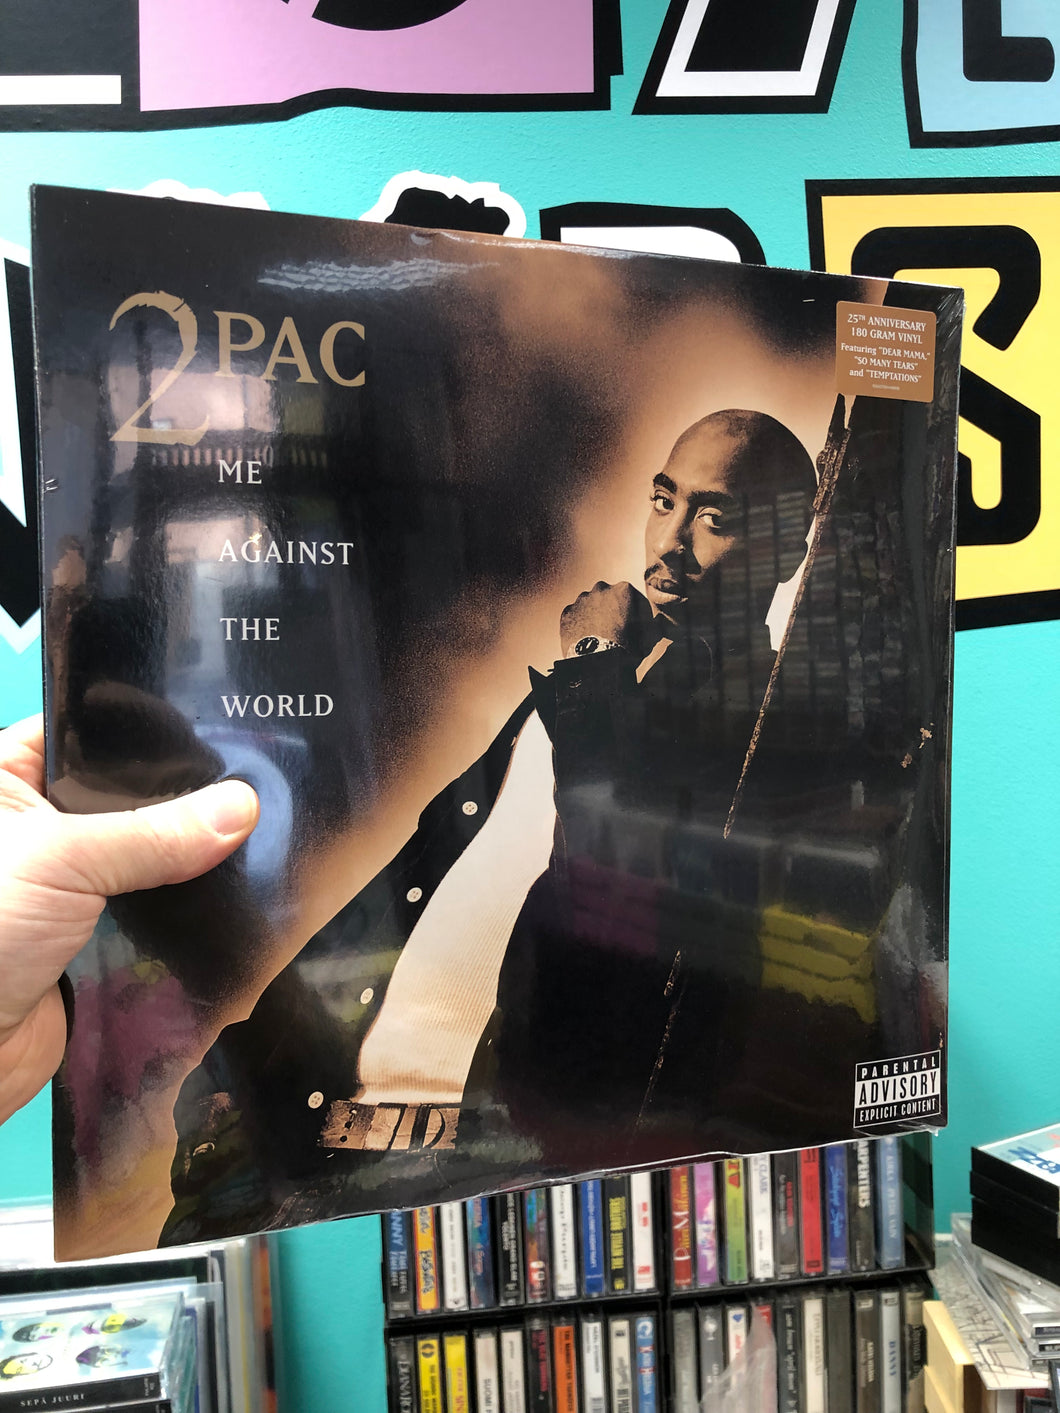 2Pac: Me Against The World, reissue, 2LP, Europe 2020